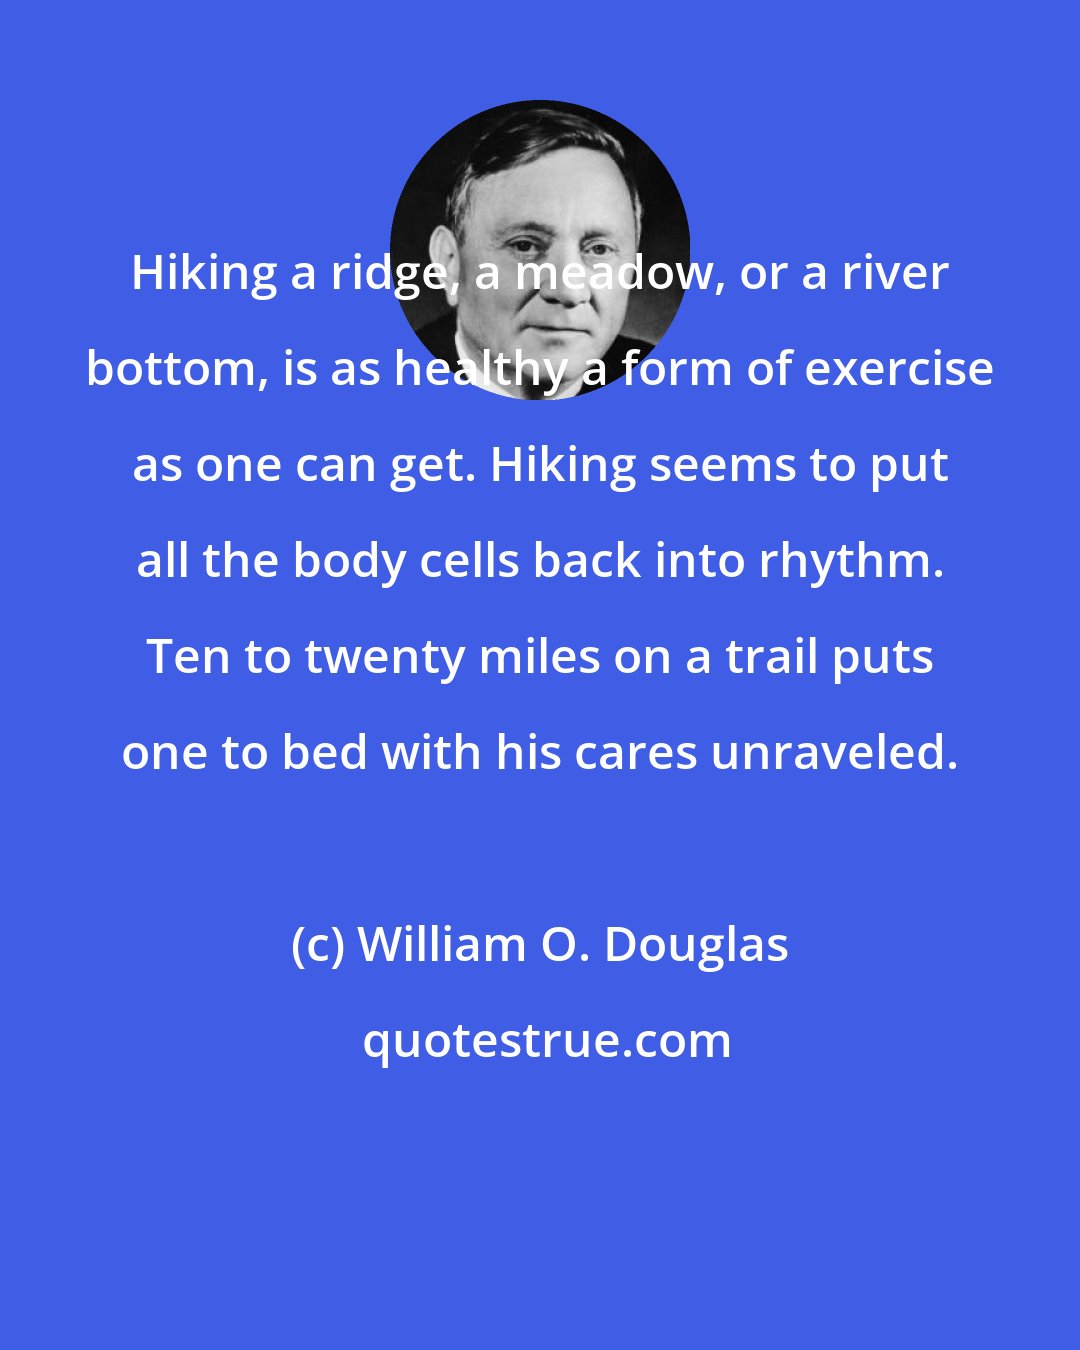 William O. Douglas: Hiking a ridge, a meadow, or a river bottom, is as healthy a form of exercise as one can get. Hiking seems to put all the body cells back into rhythm. Ten to twenty miles on a trail puts one to bed with his cares unraveled.